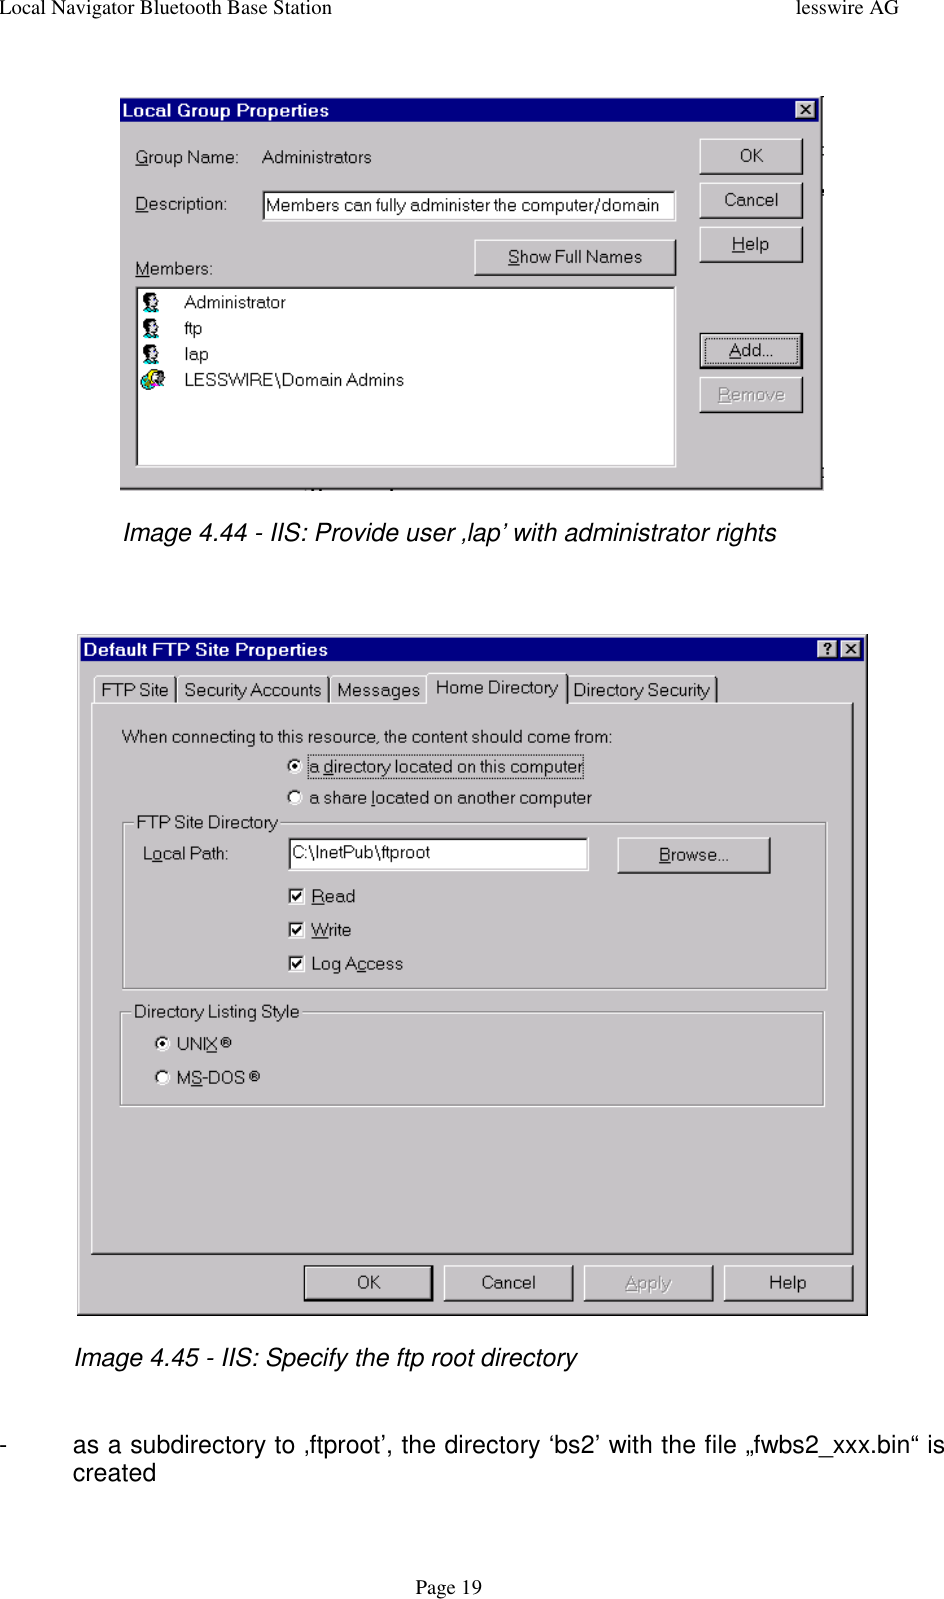 Local Navigator Bluetooth Base Station lesswire AGPage 19       Image 4.44 - IIS: Provide user ‚lap’ with administrator rightsImage 4.45 - IIS: Specify the ftp root directory- as a subdirectory to ‚ftproot’, the directory ‘bs2’ with the file „fwbs2_xxx.bin“ iscreated